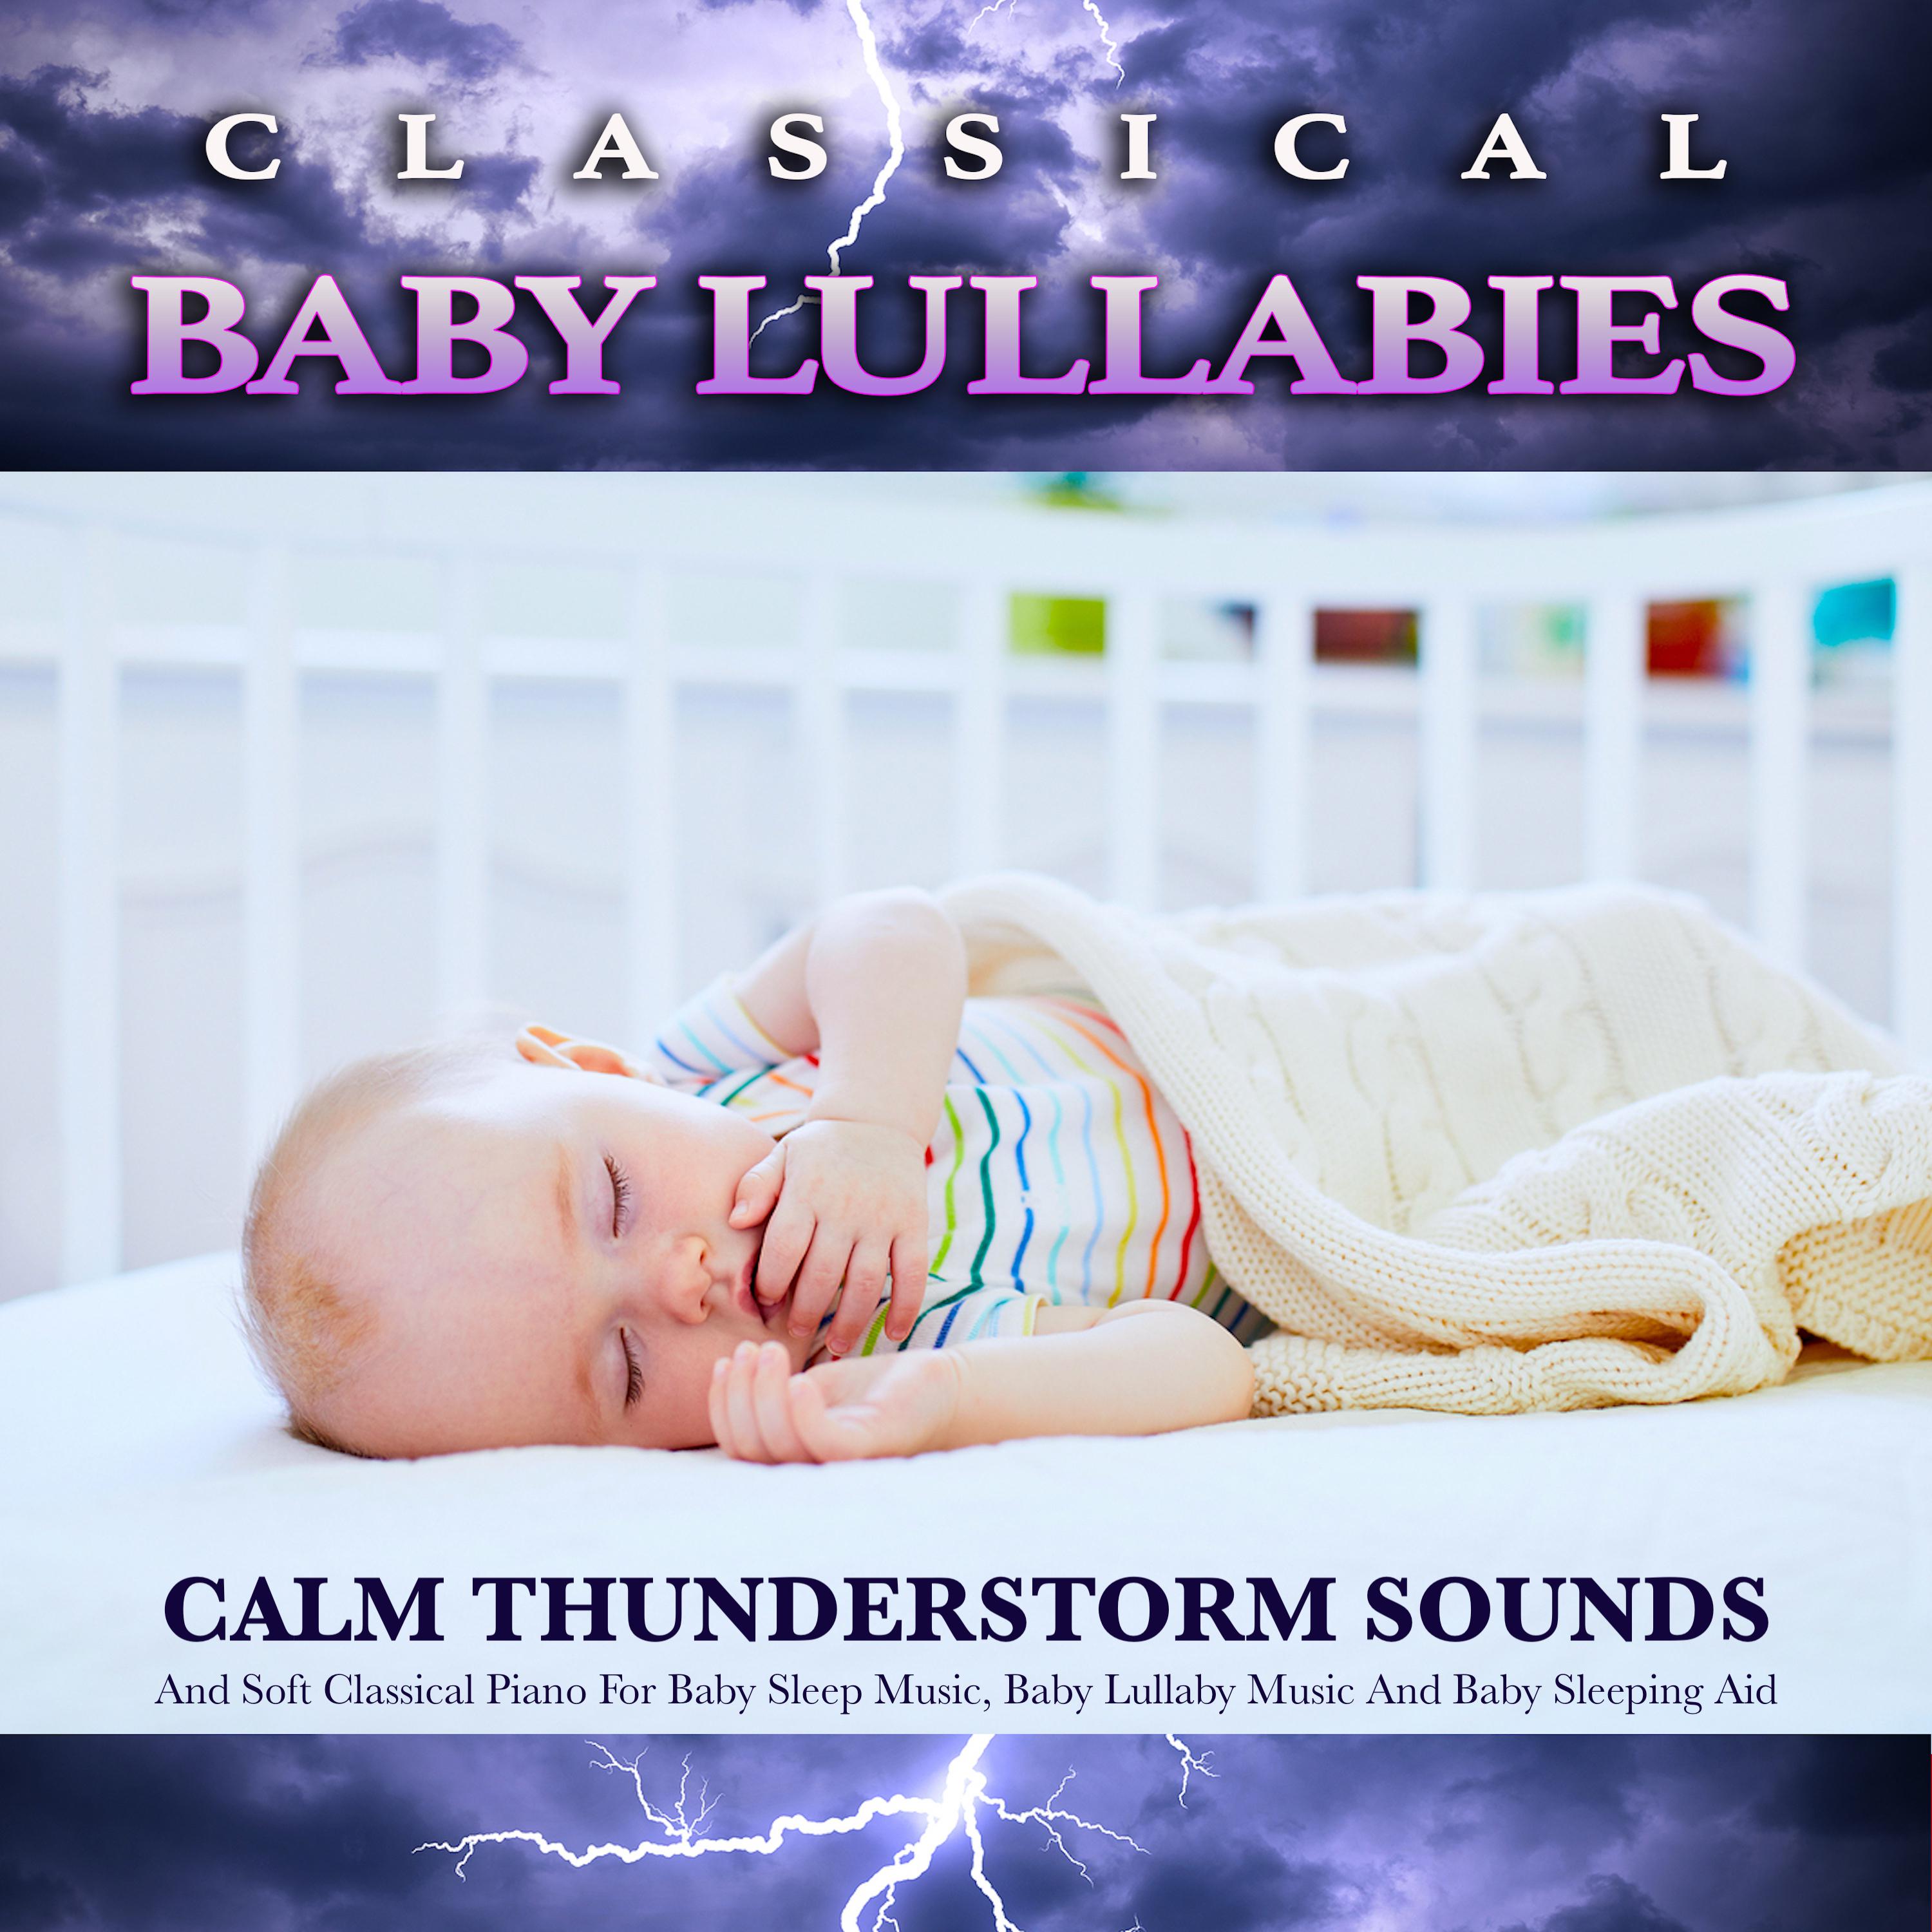 Variations on a Theme - Rachmaninoff - Baby Lullaby - Baby Sleep Music - Classical Piano and Thunderstorm Sounds For Sleep